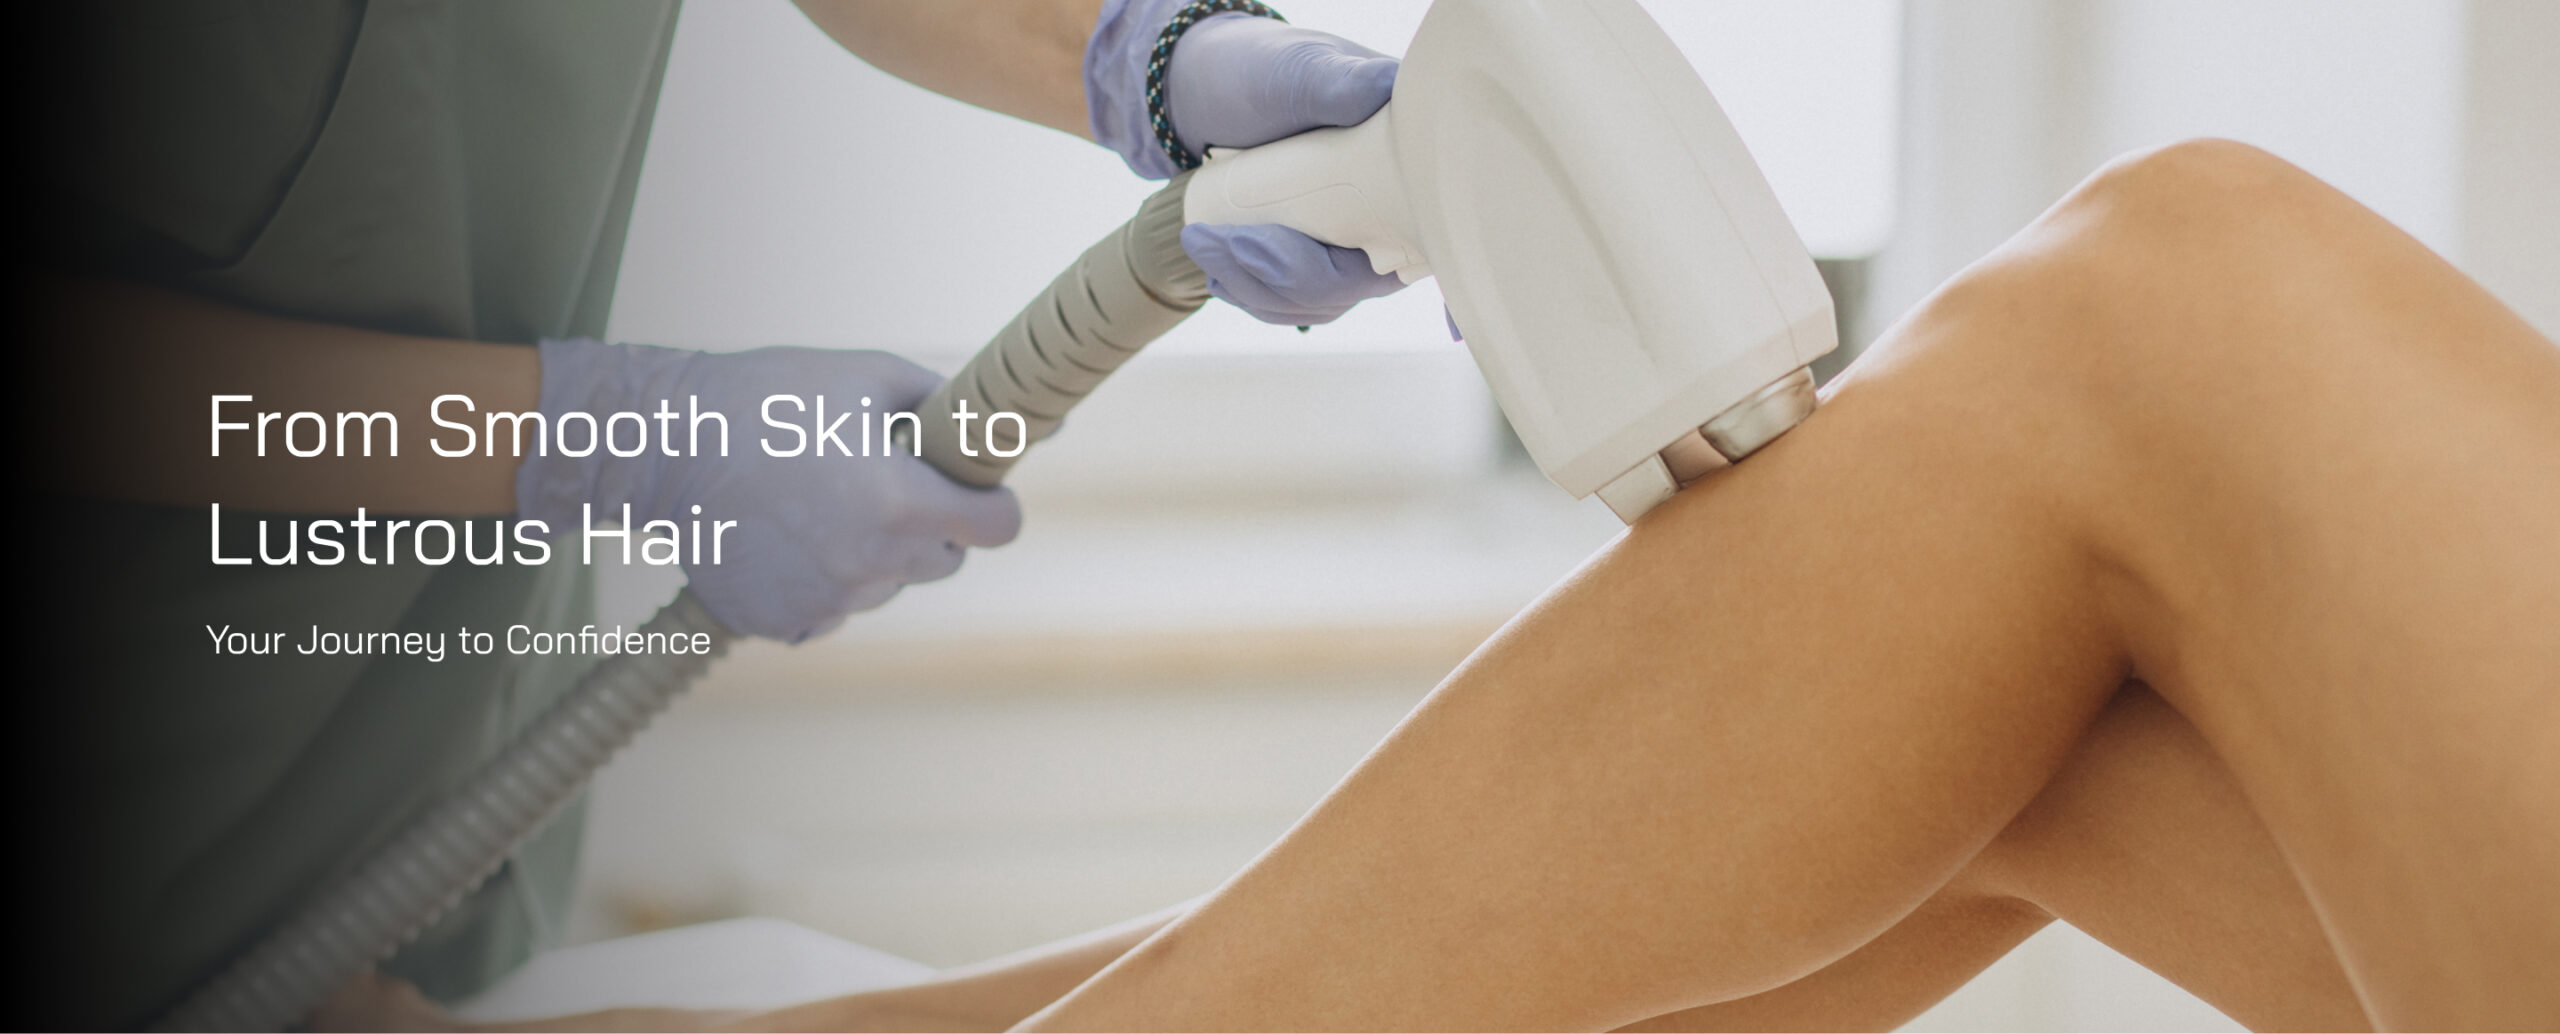 Smooth, hair-free skin achieved through advanced laser therapy at The Skin Firm.